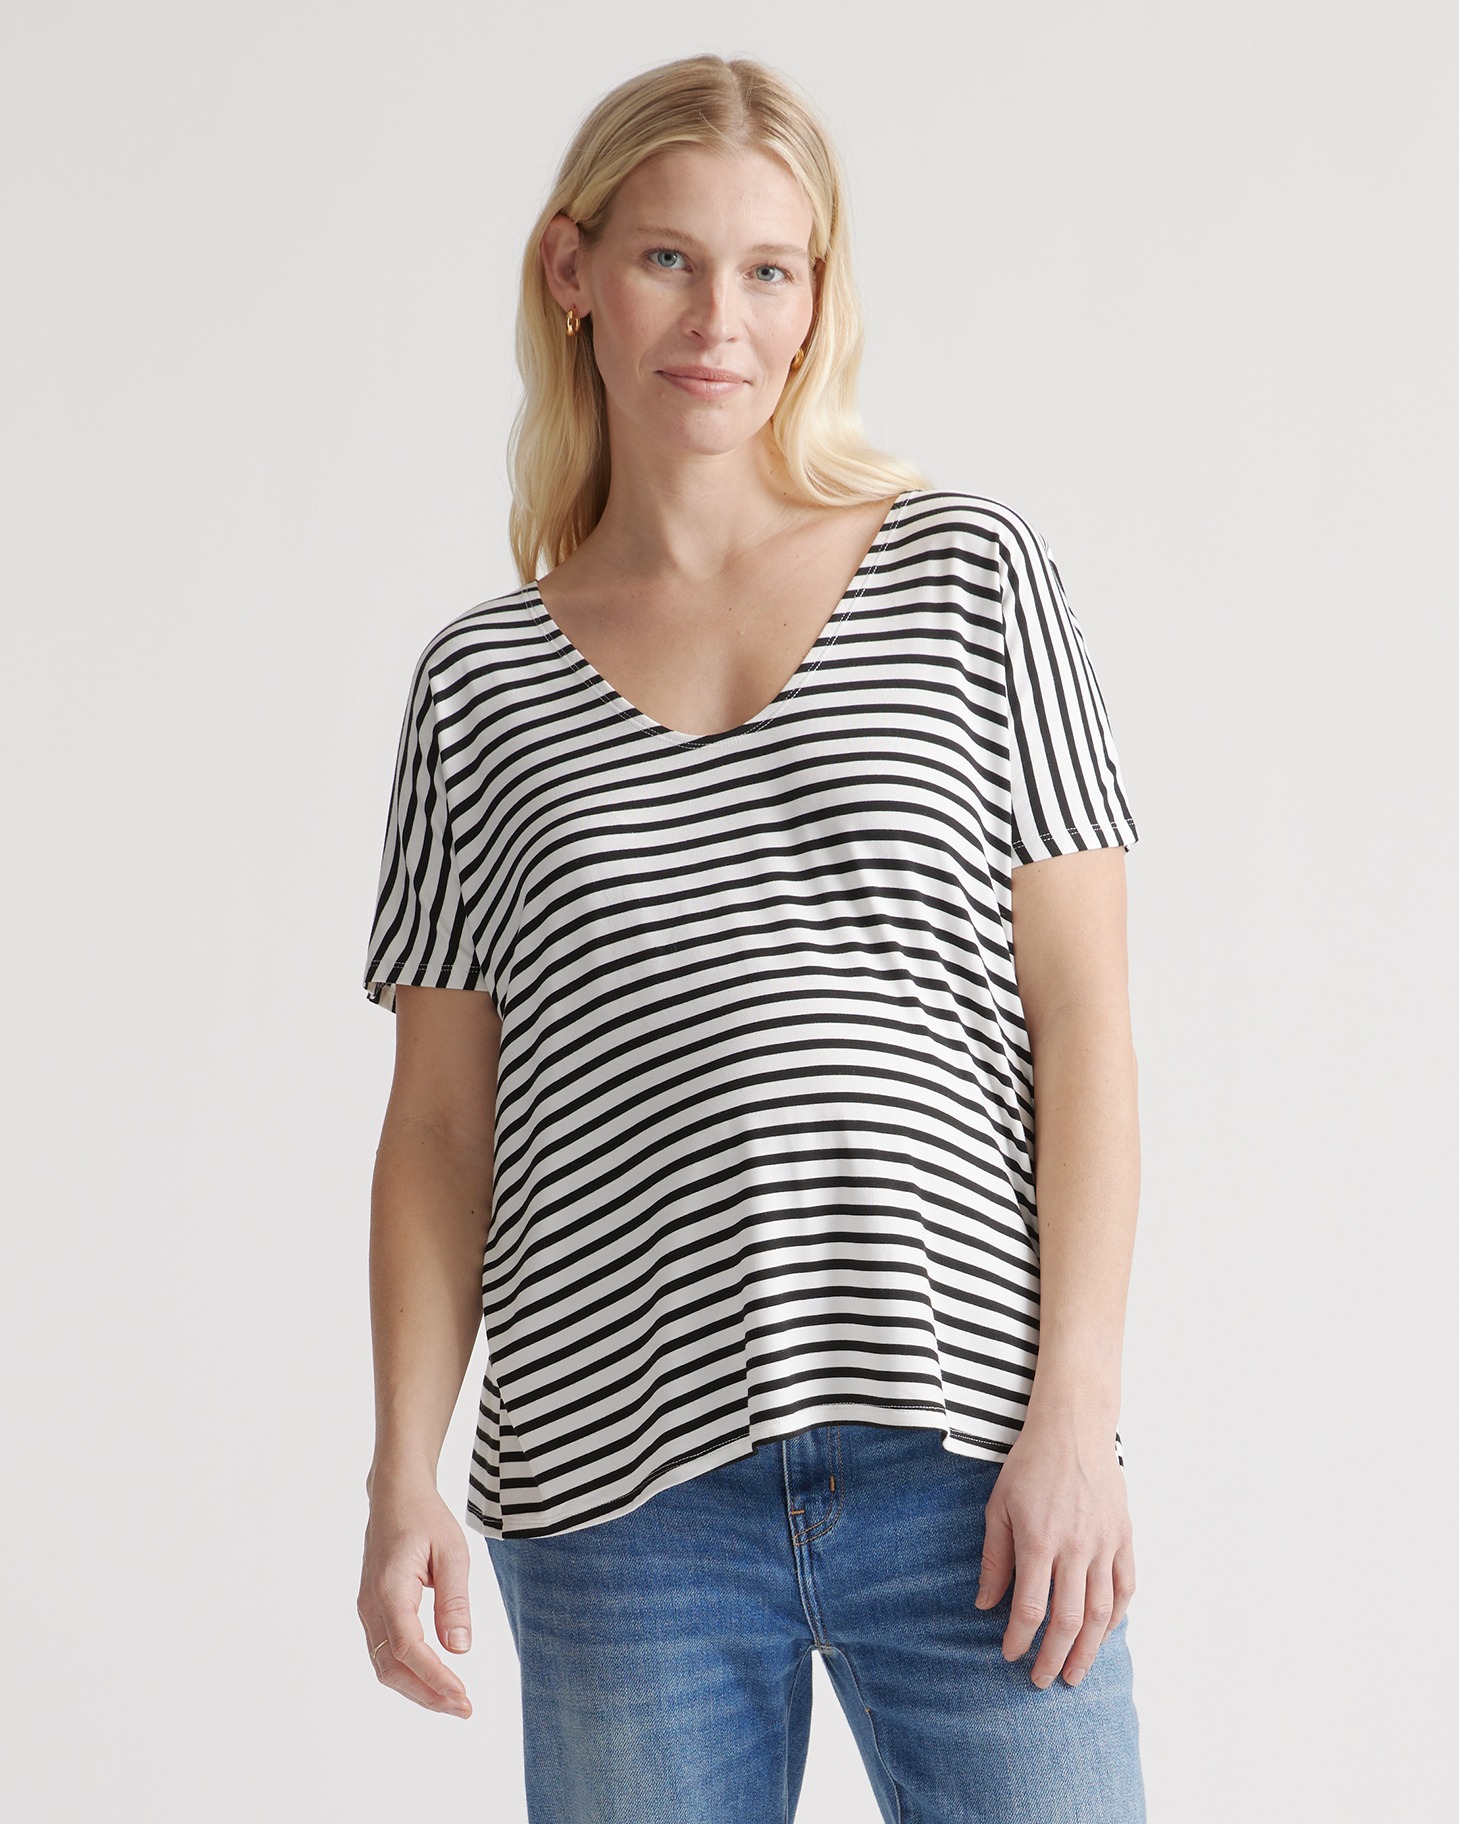 Women's Bamboo Jersey Maternity V-Neck T-Shirt 2-Pack in Black/Black White Stripe, Size Large by Quince